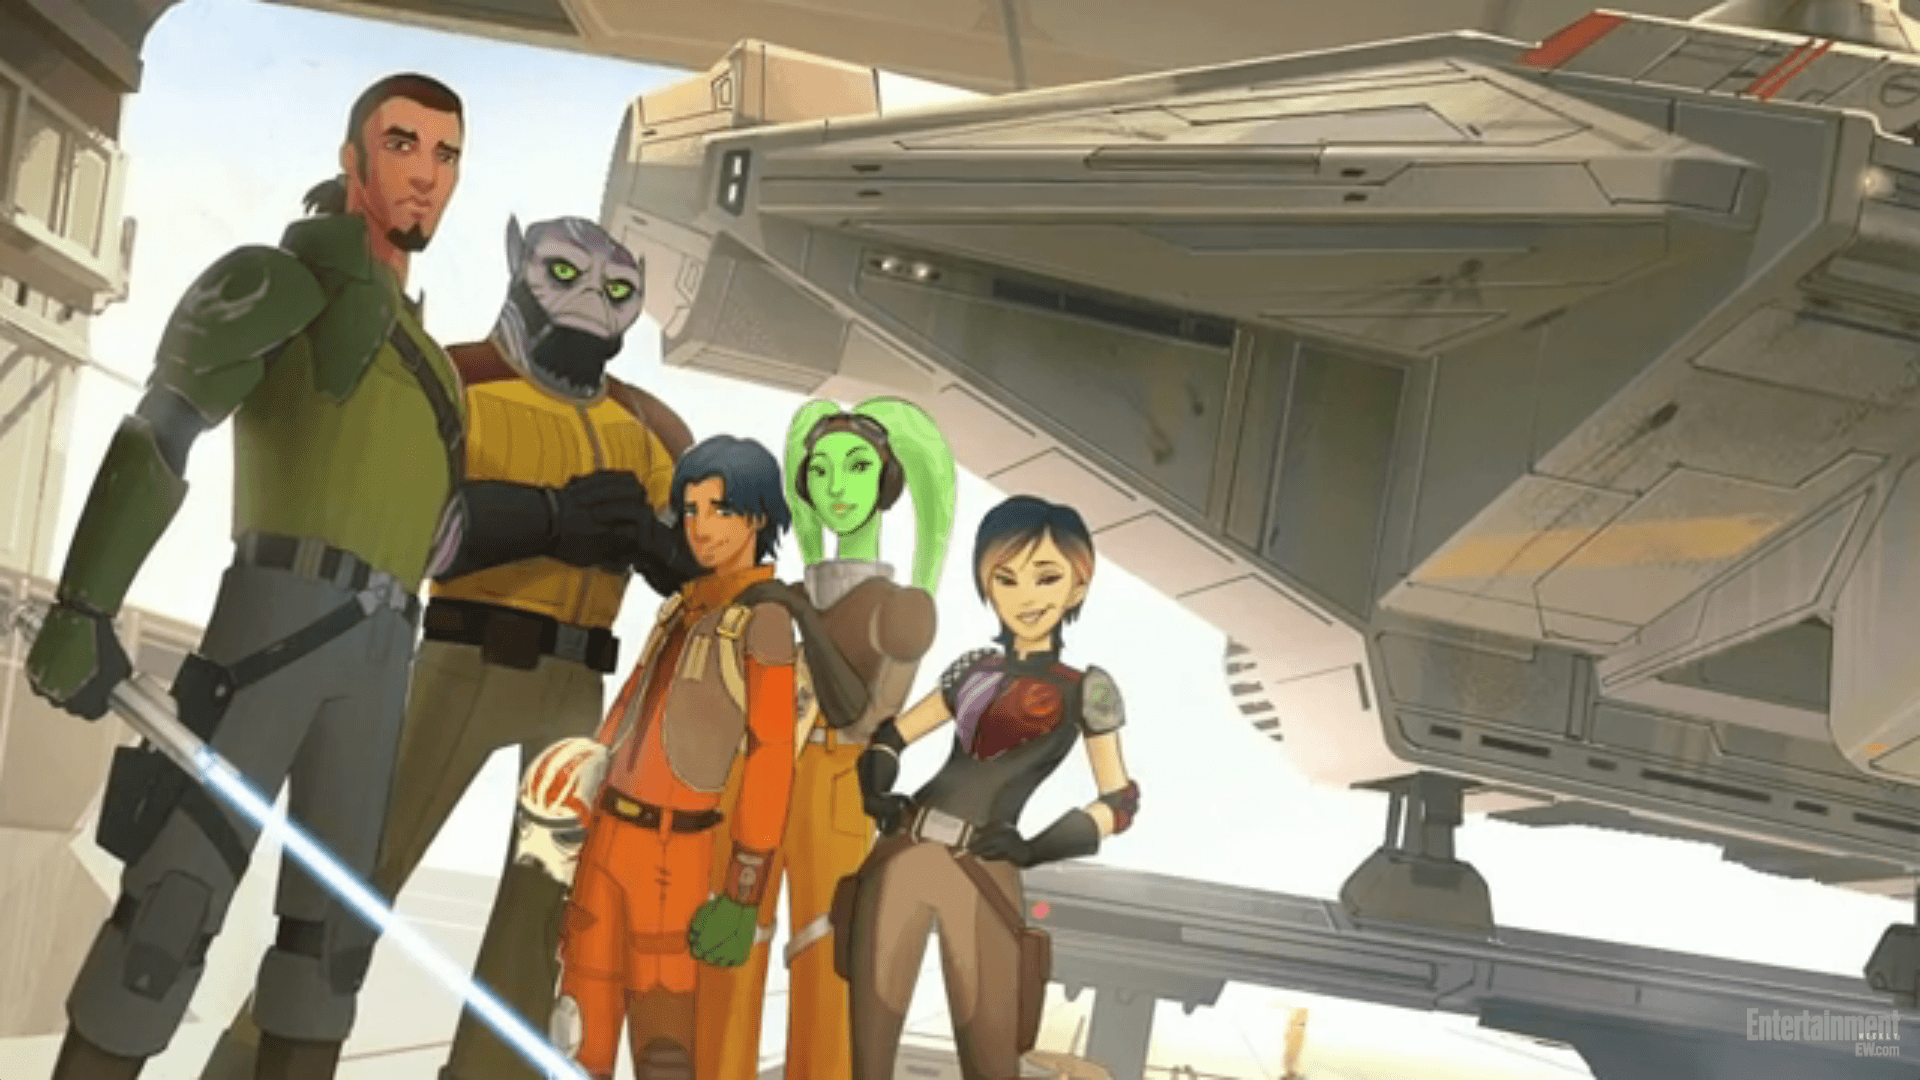 Prepare To Fight The Empire With Star Wars REBELS! This October